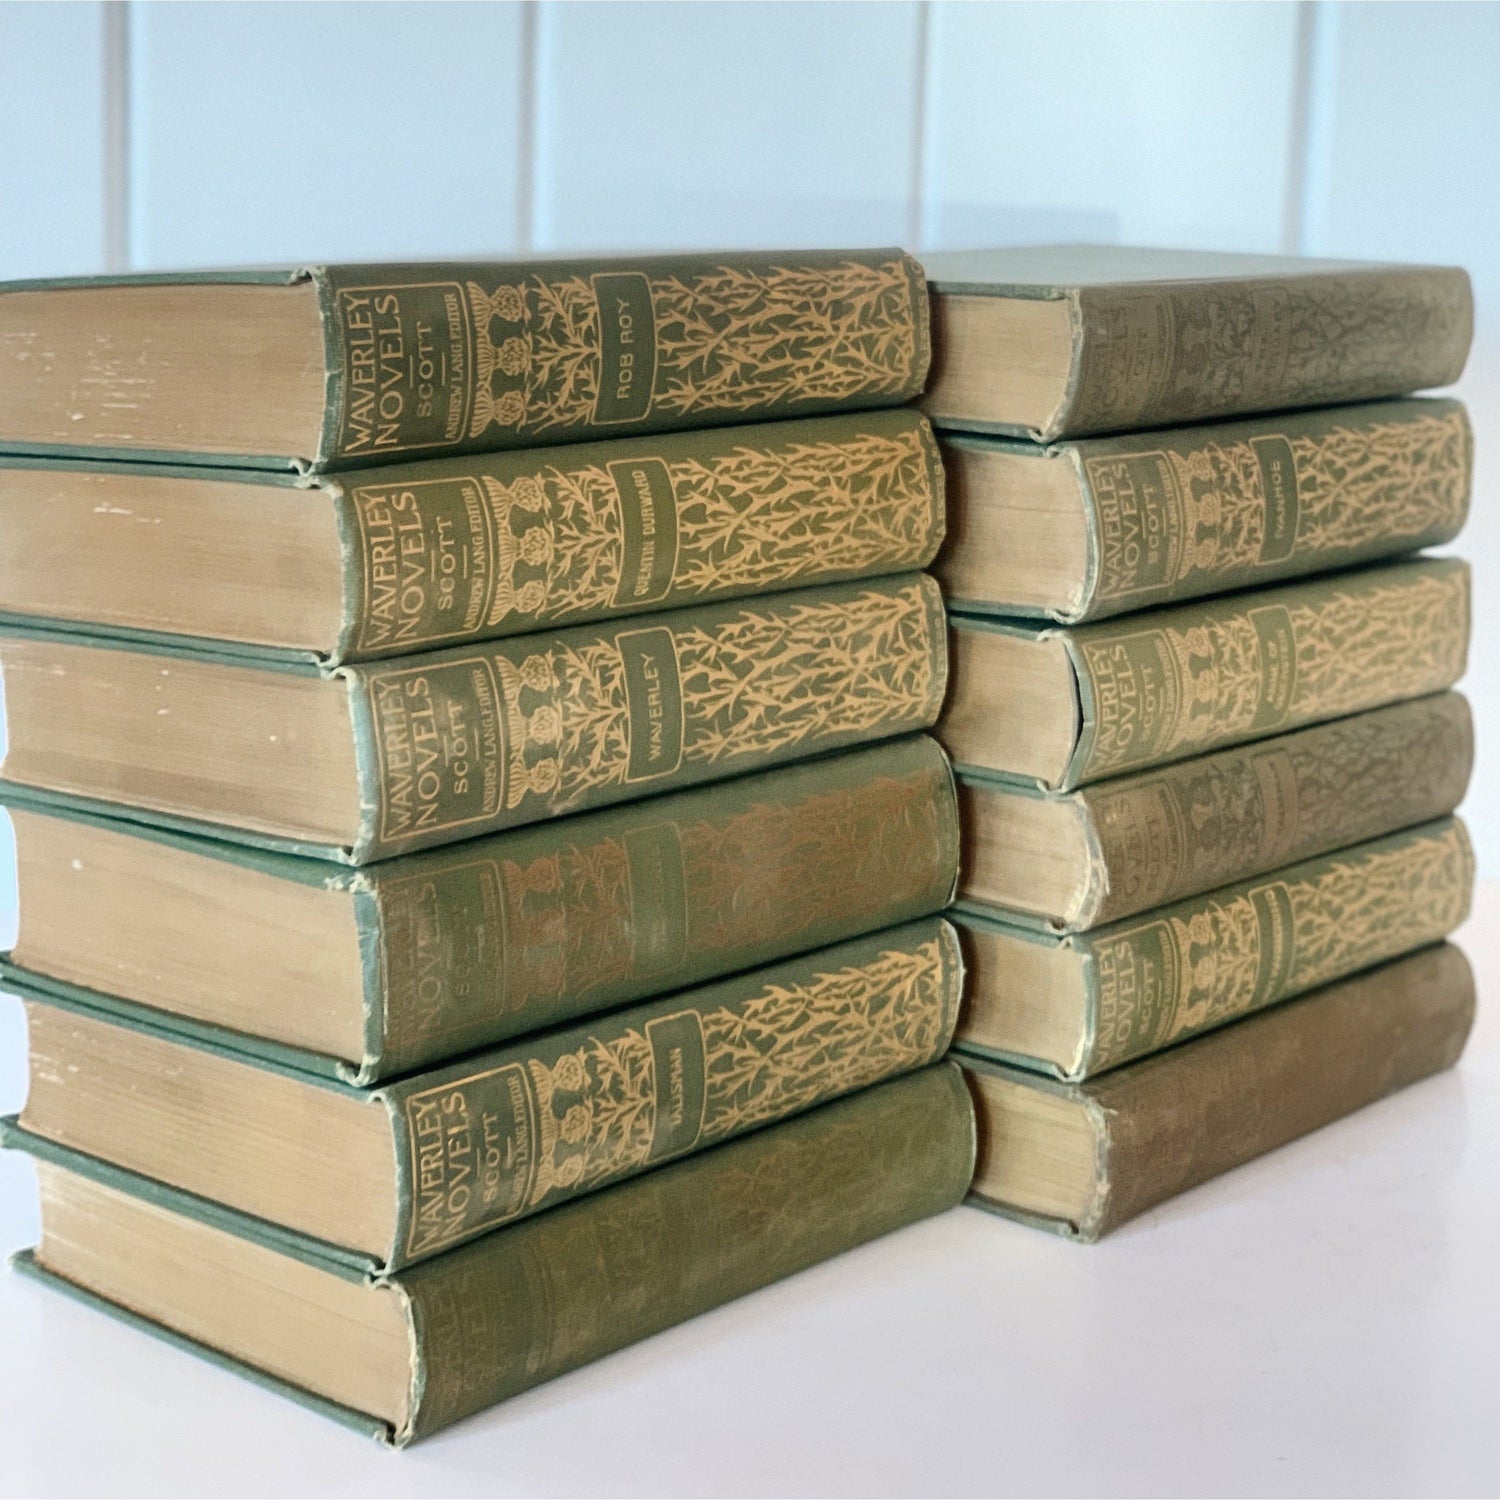 The Waverley Novels, Sir Walter Scott, Andrew Lang Edition, 1894, Antique Large Green Book Set for Shelf Styling